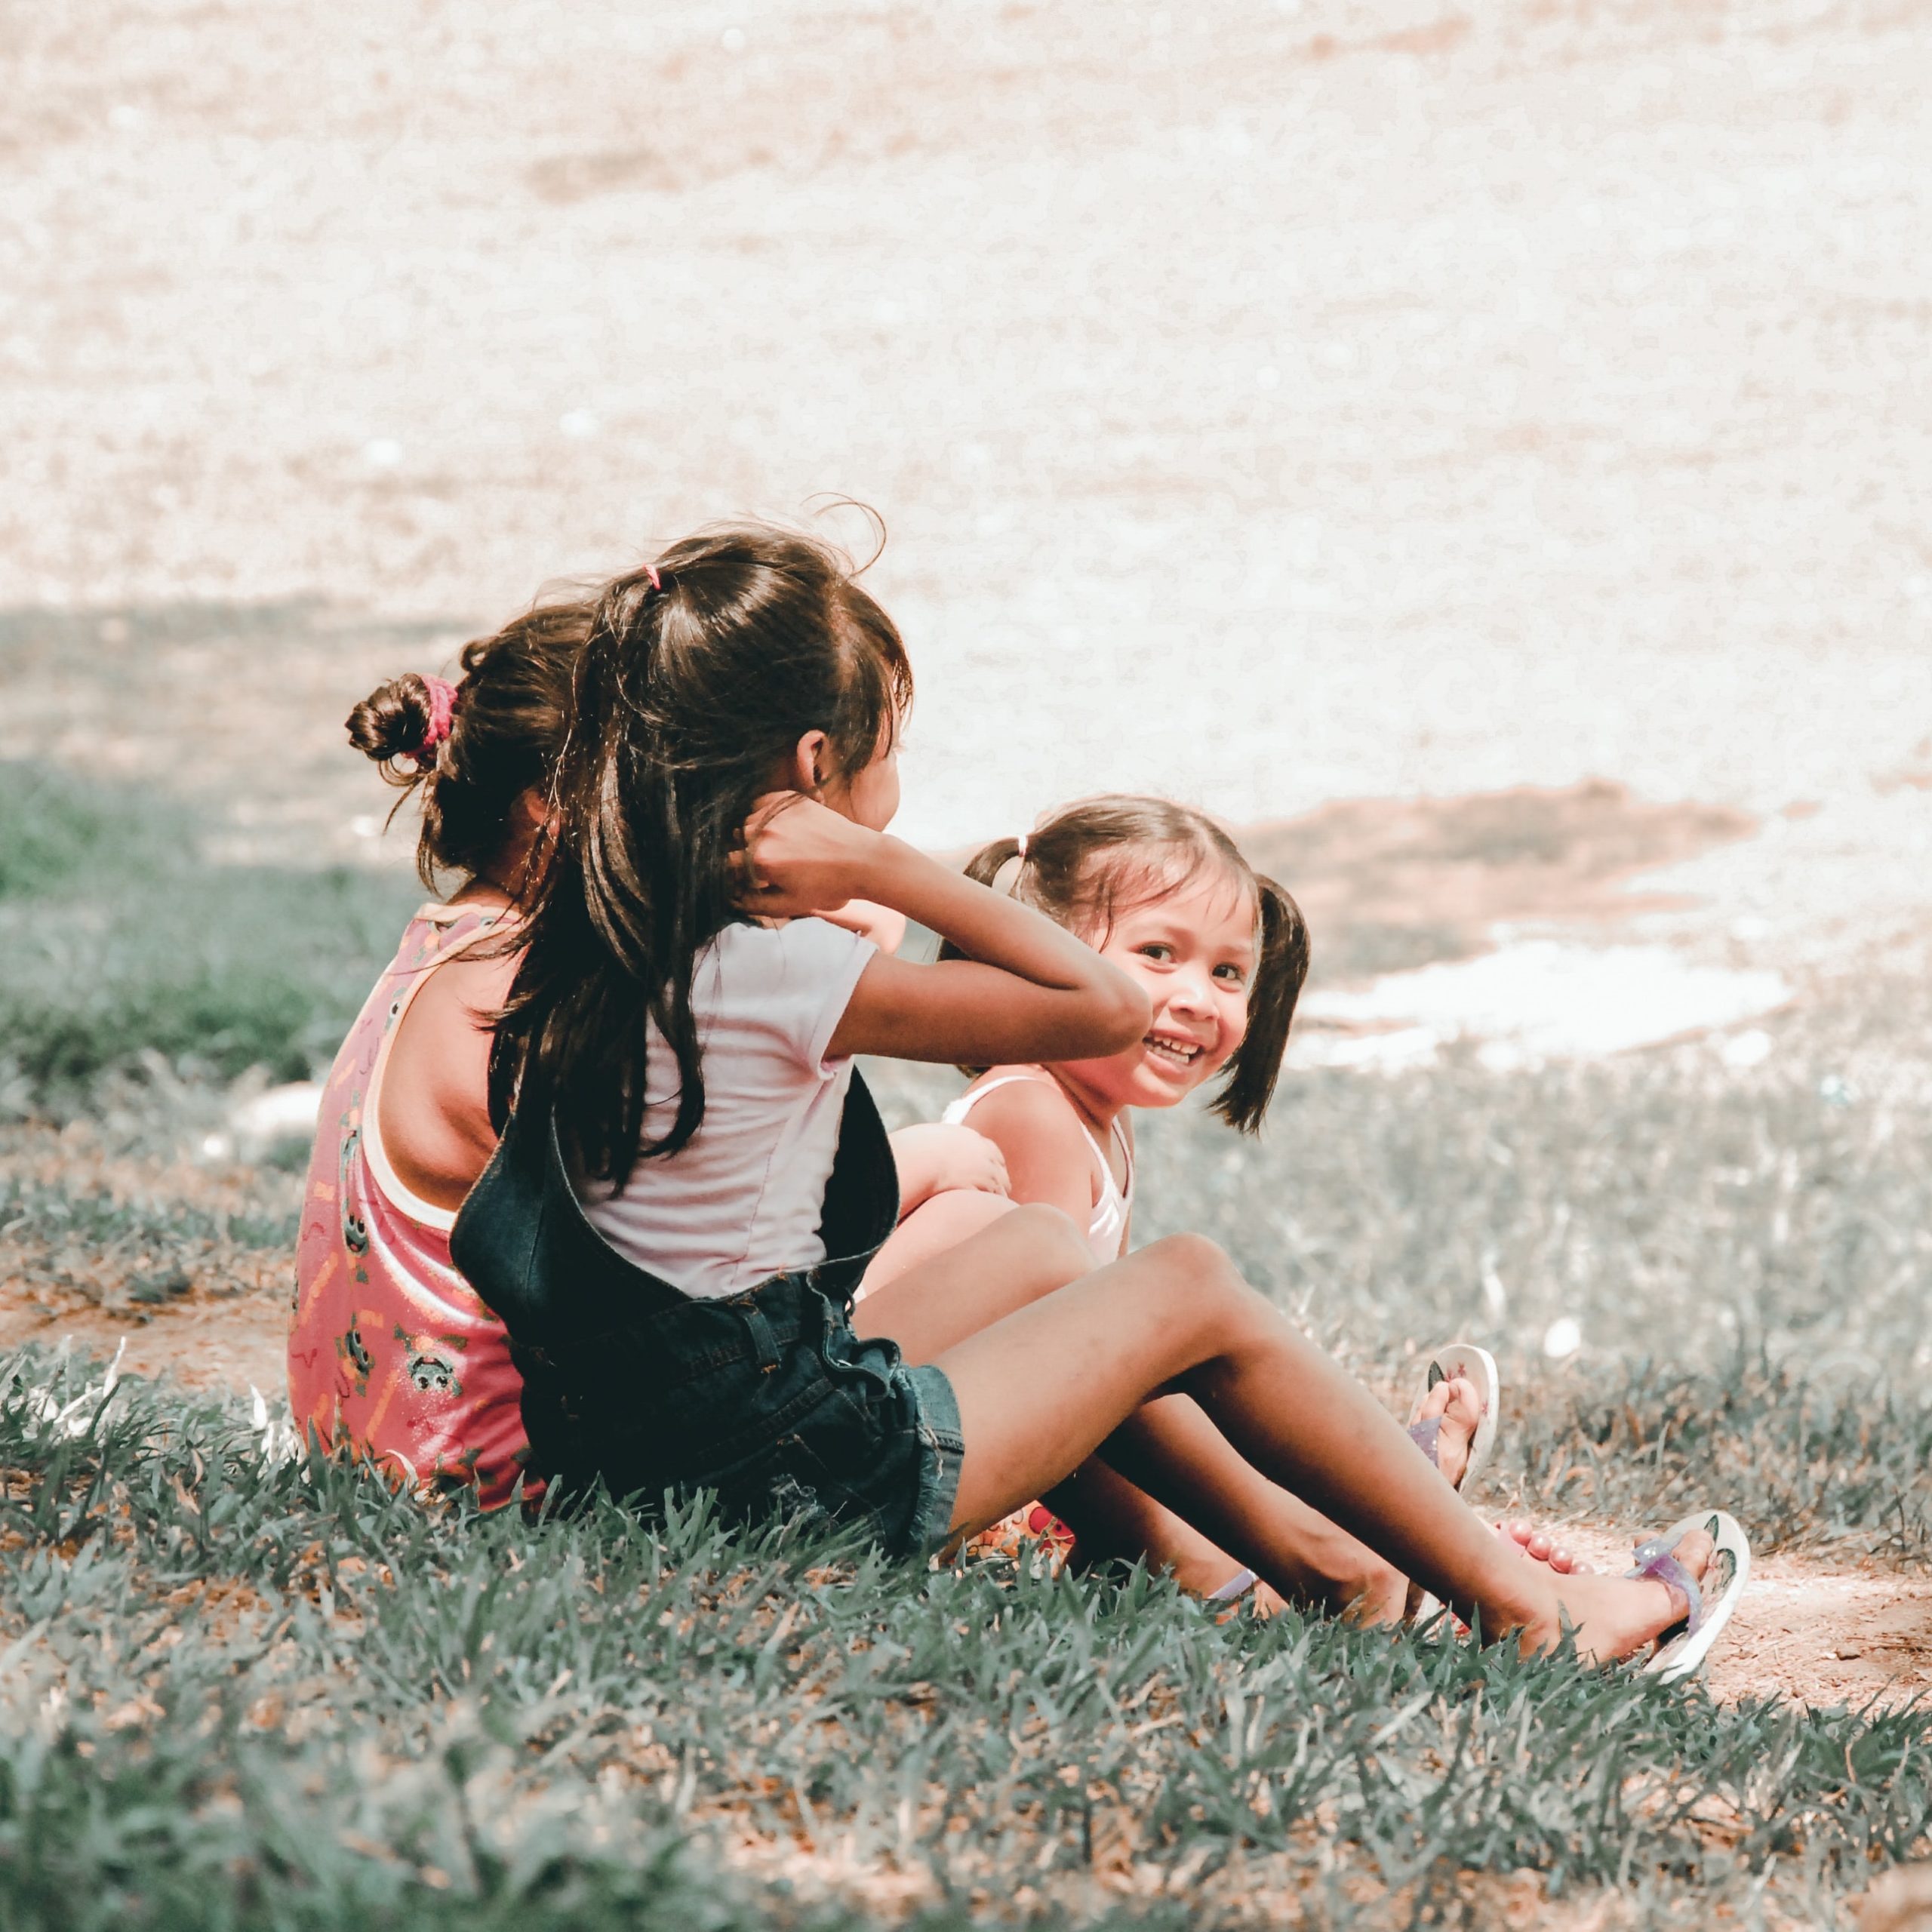 Three kids sit on the grass. Two of them are facing away, but one is looking directly at the camera smiling.